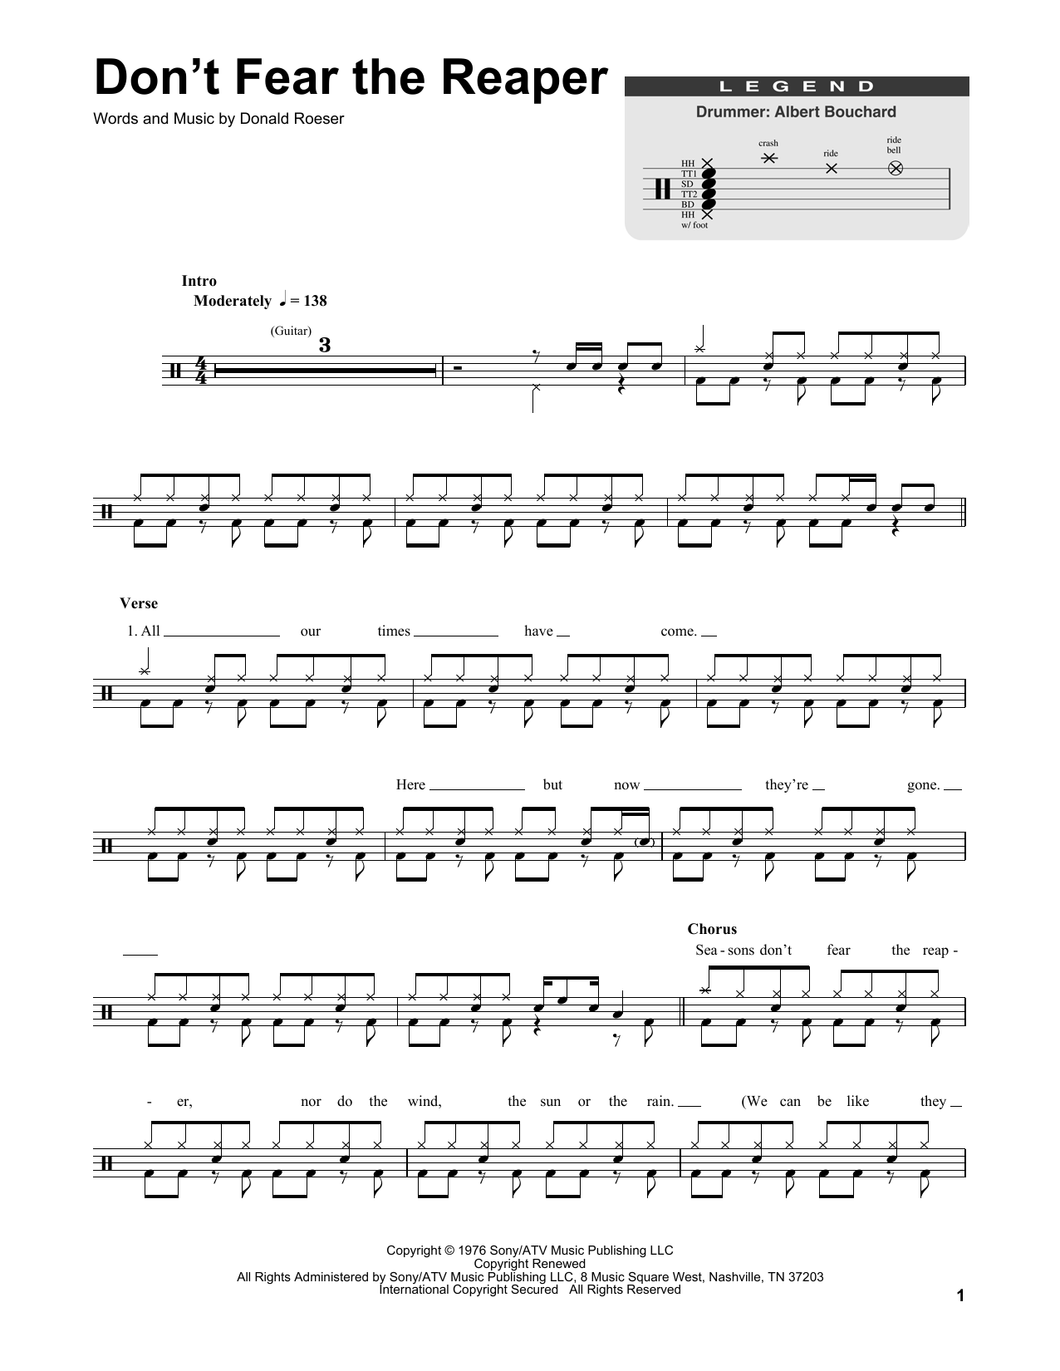 (Don't Fear) the Reaper - Blue Oyster Cult - Full Drum Transcription / Drum Sheet Music - SheetMusicDirect DT175028